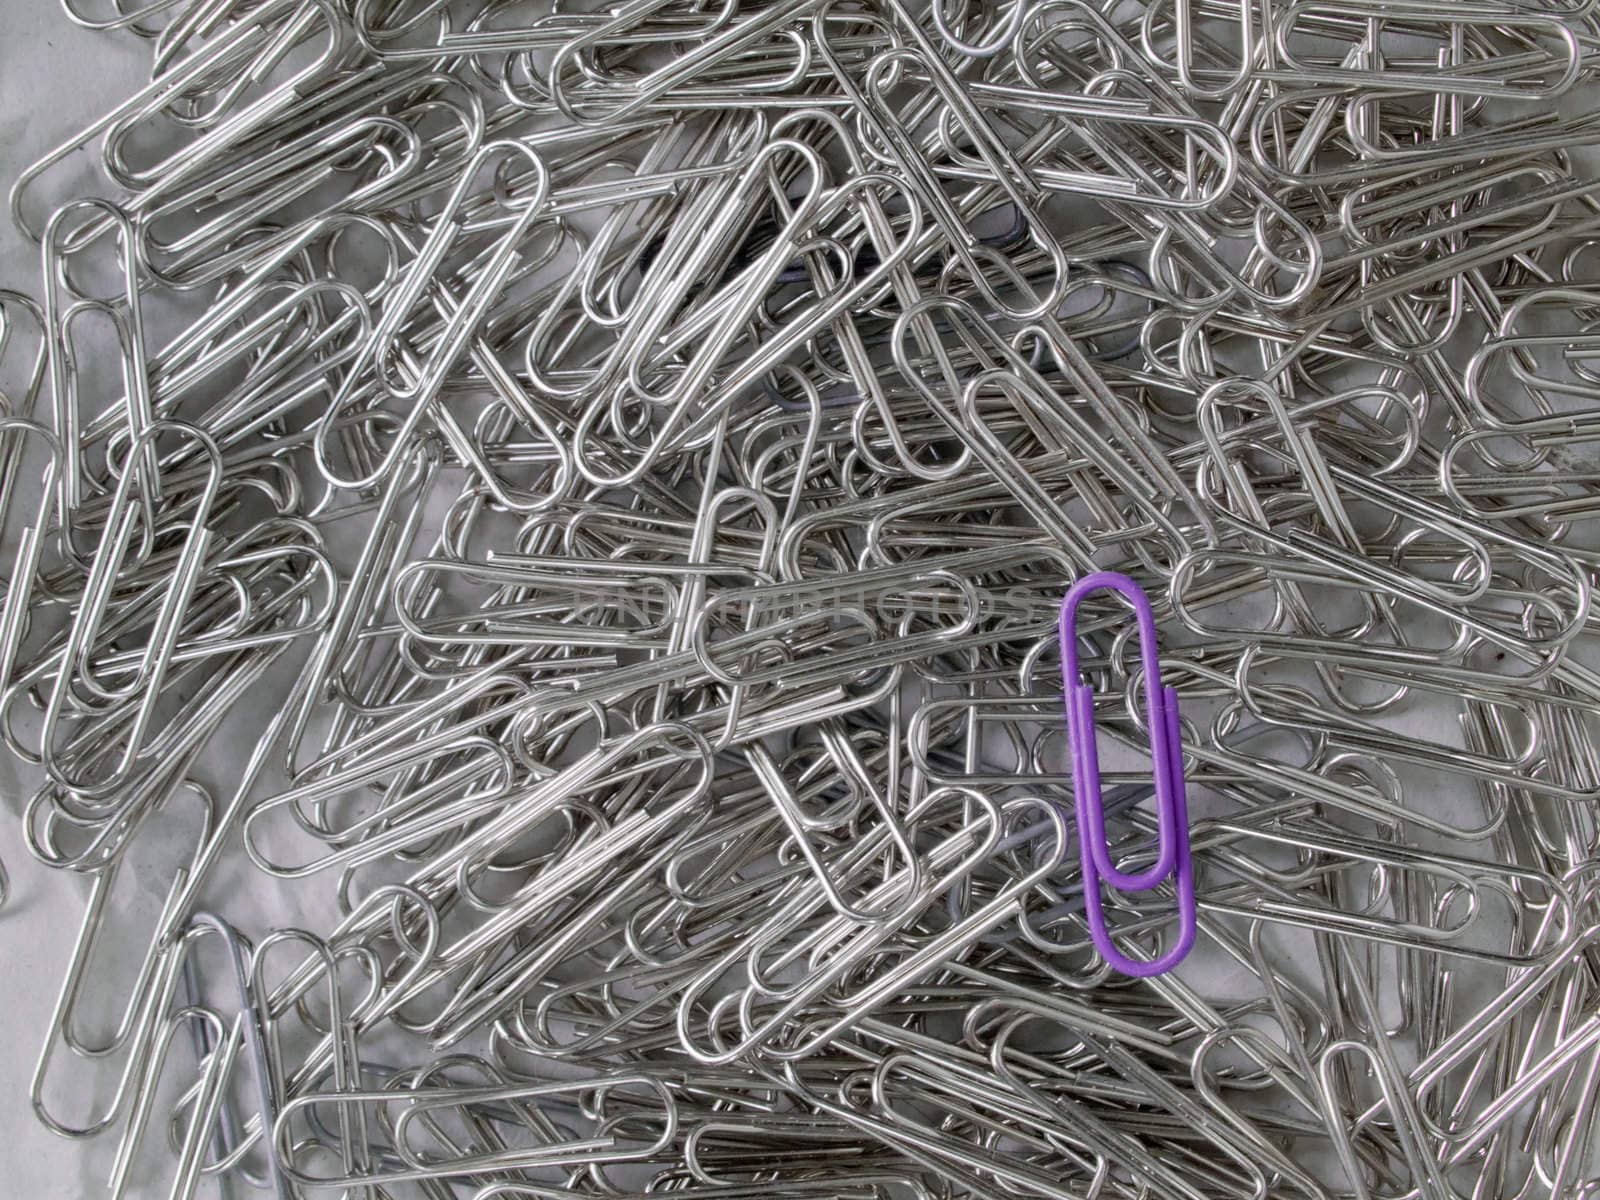 Violet and chrome paper clip by nuttakit